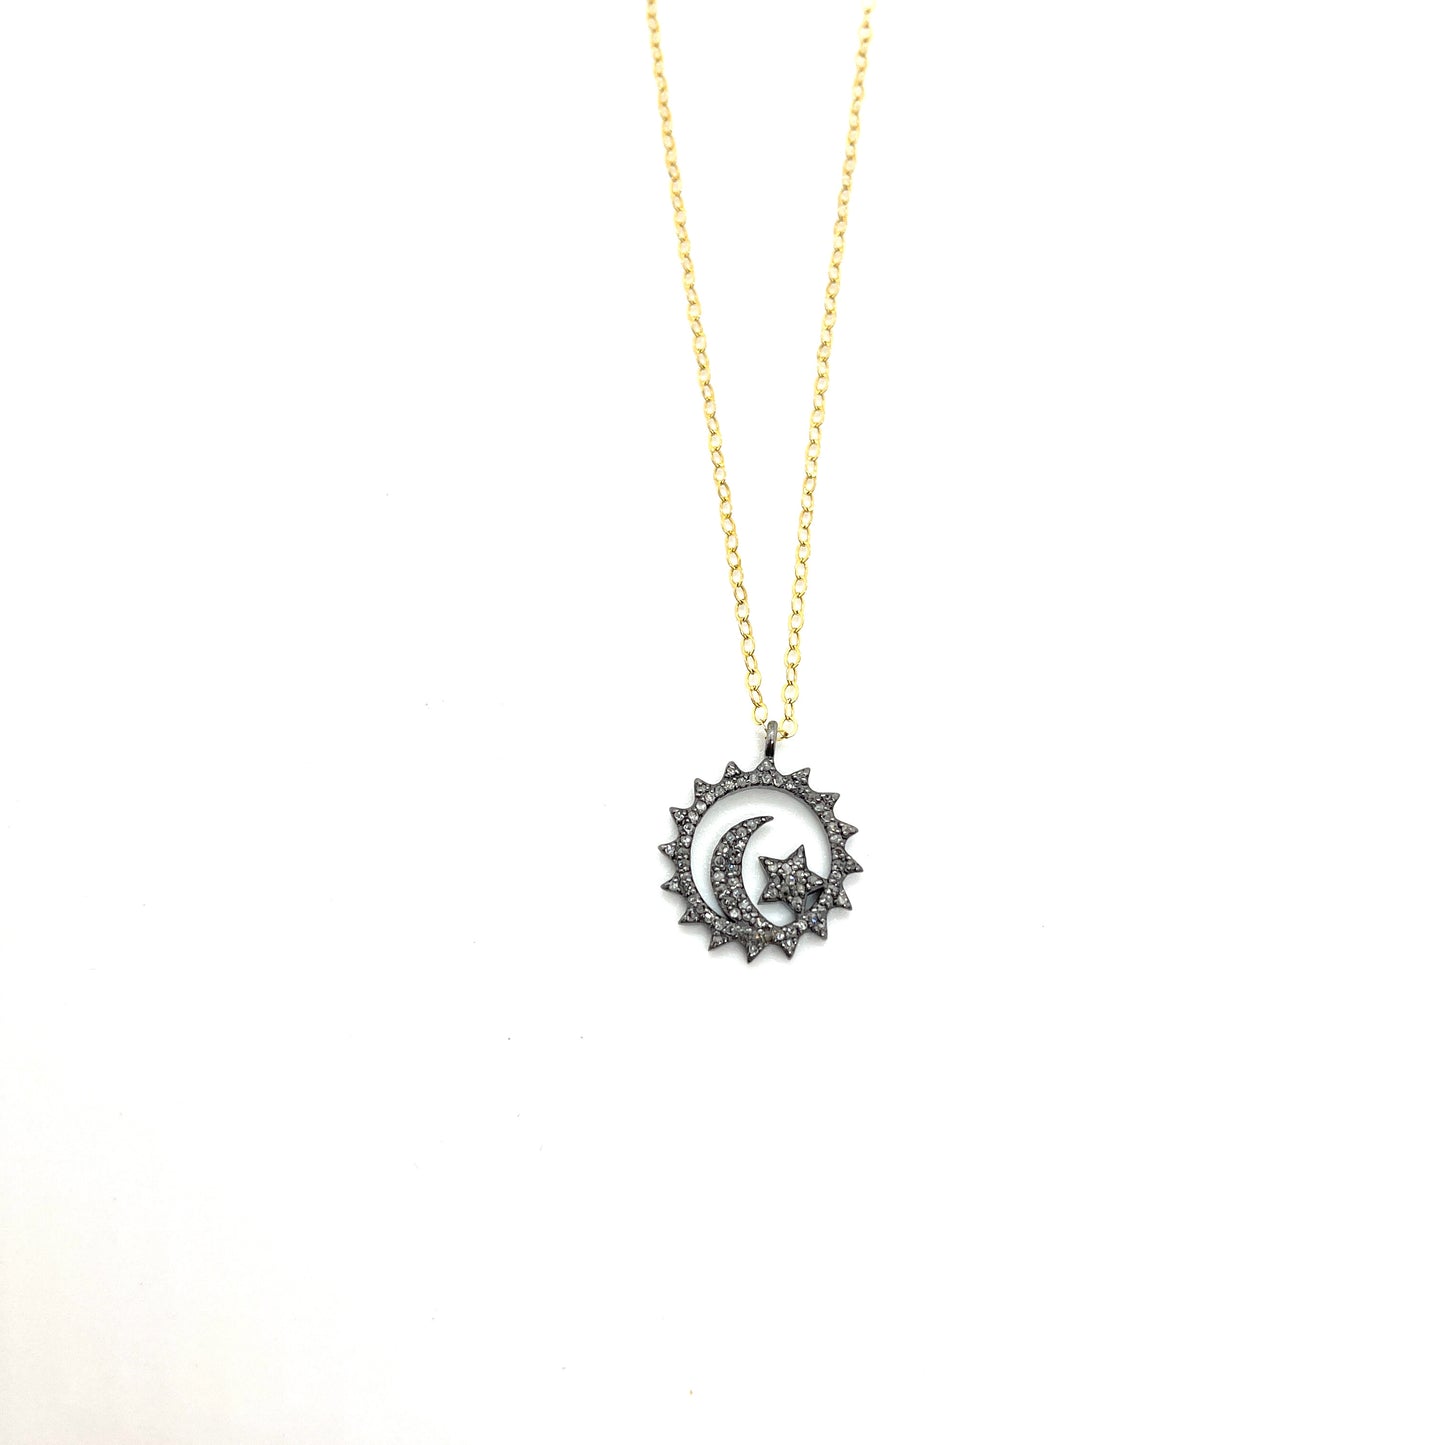 Avaasi Necklace N 2418